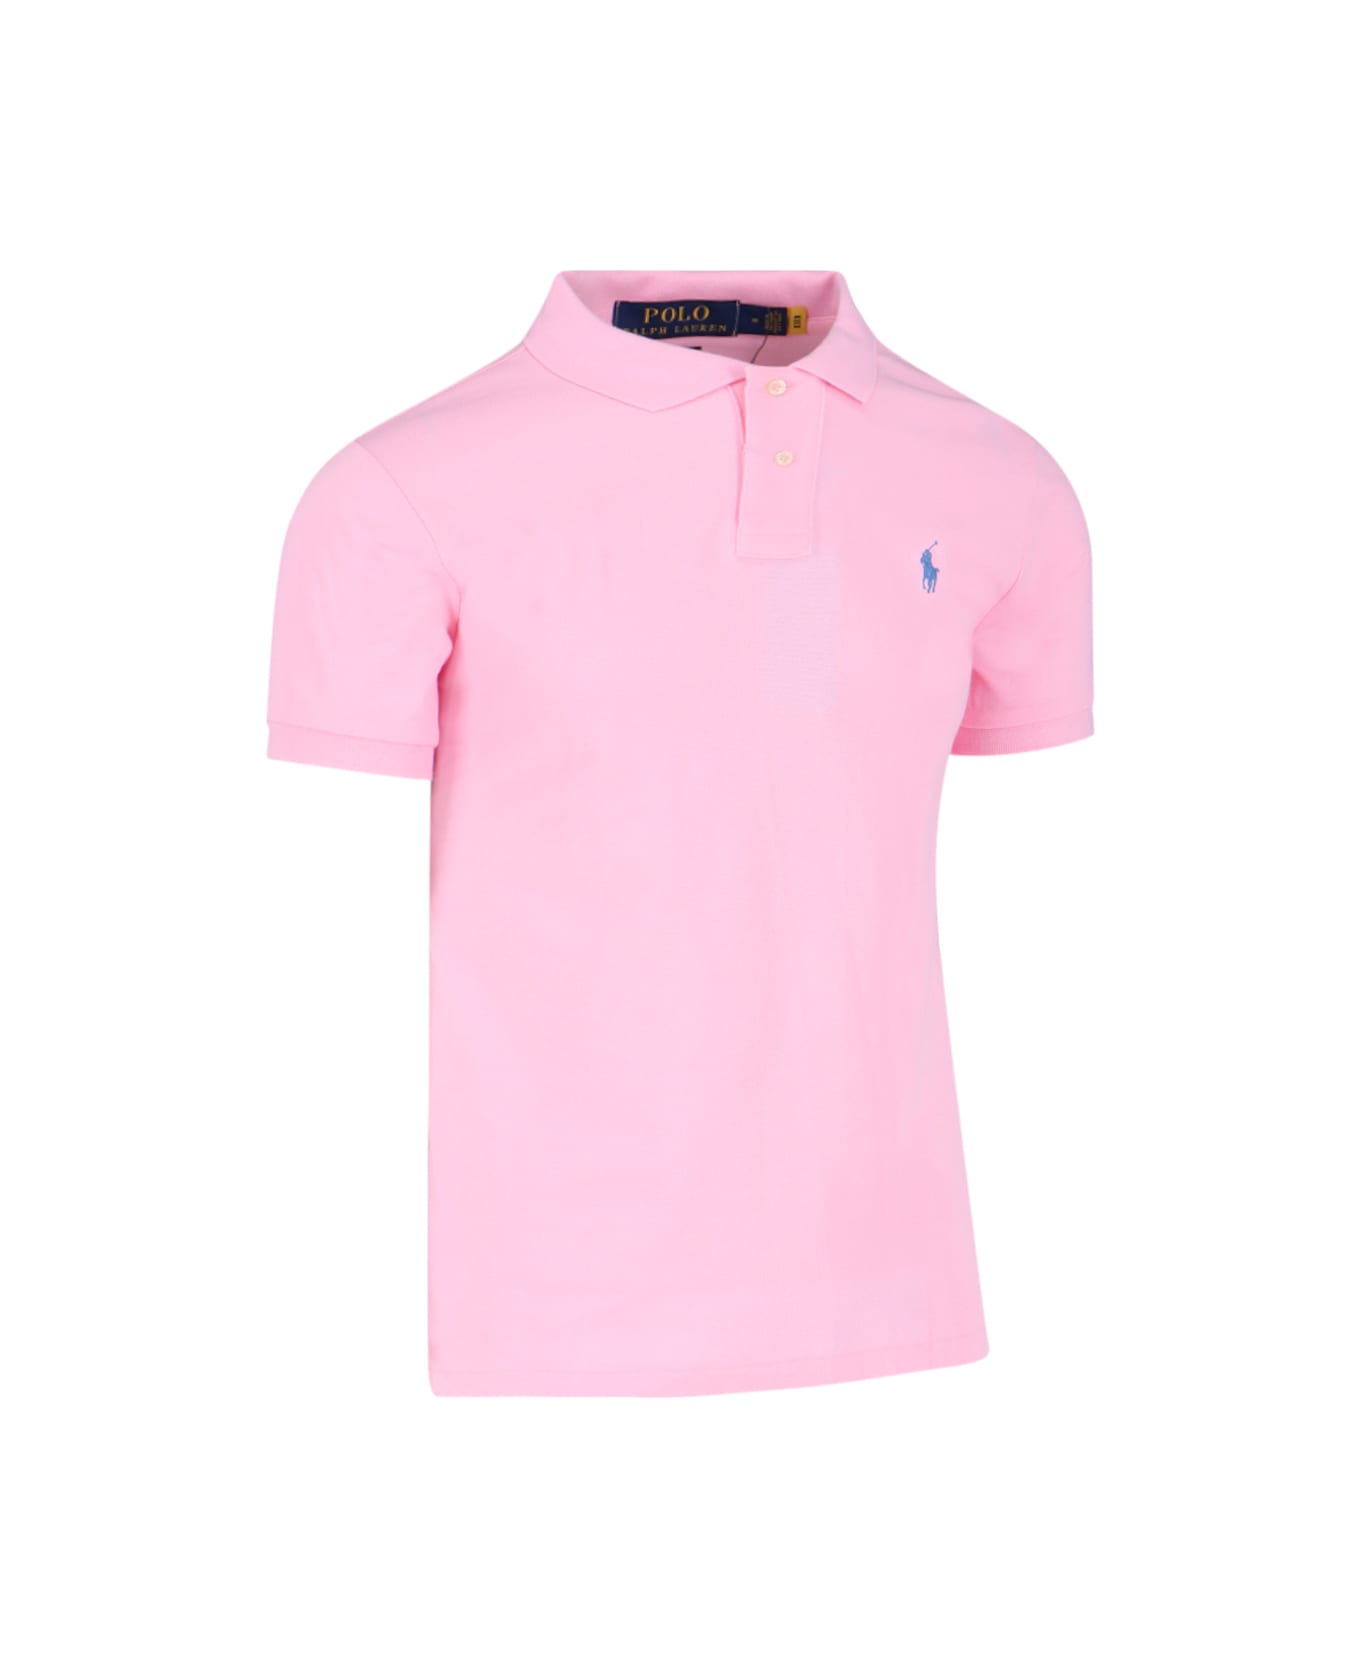 Ralph Lauren Pink And Blue Slim-fit Pique Polo Shirt - Pink